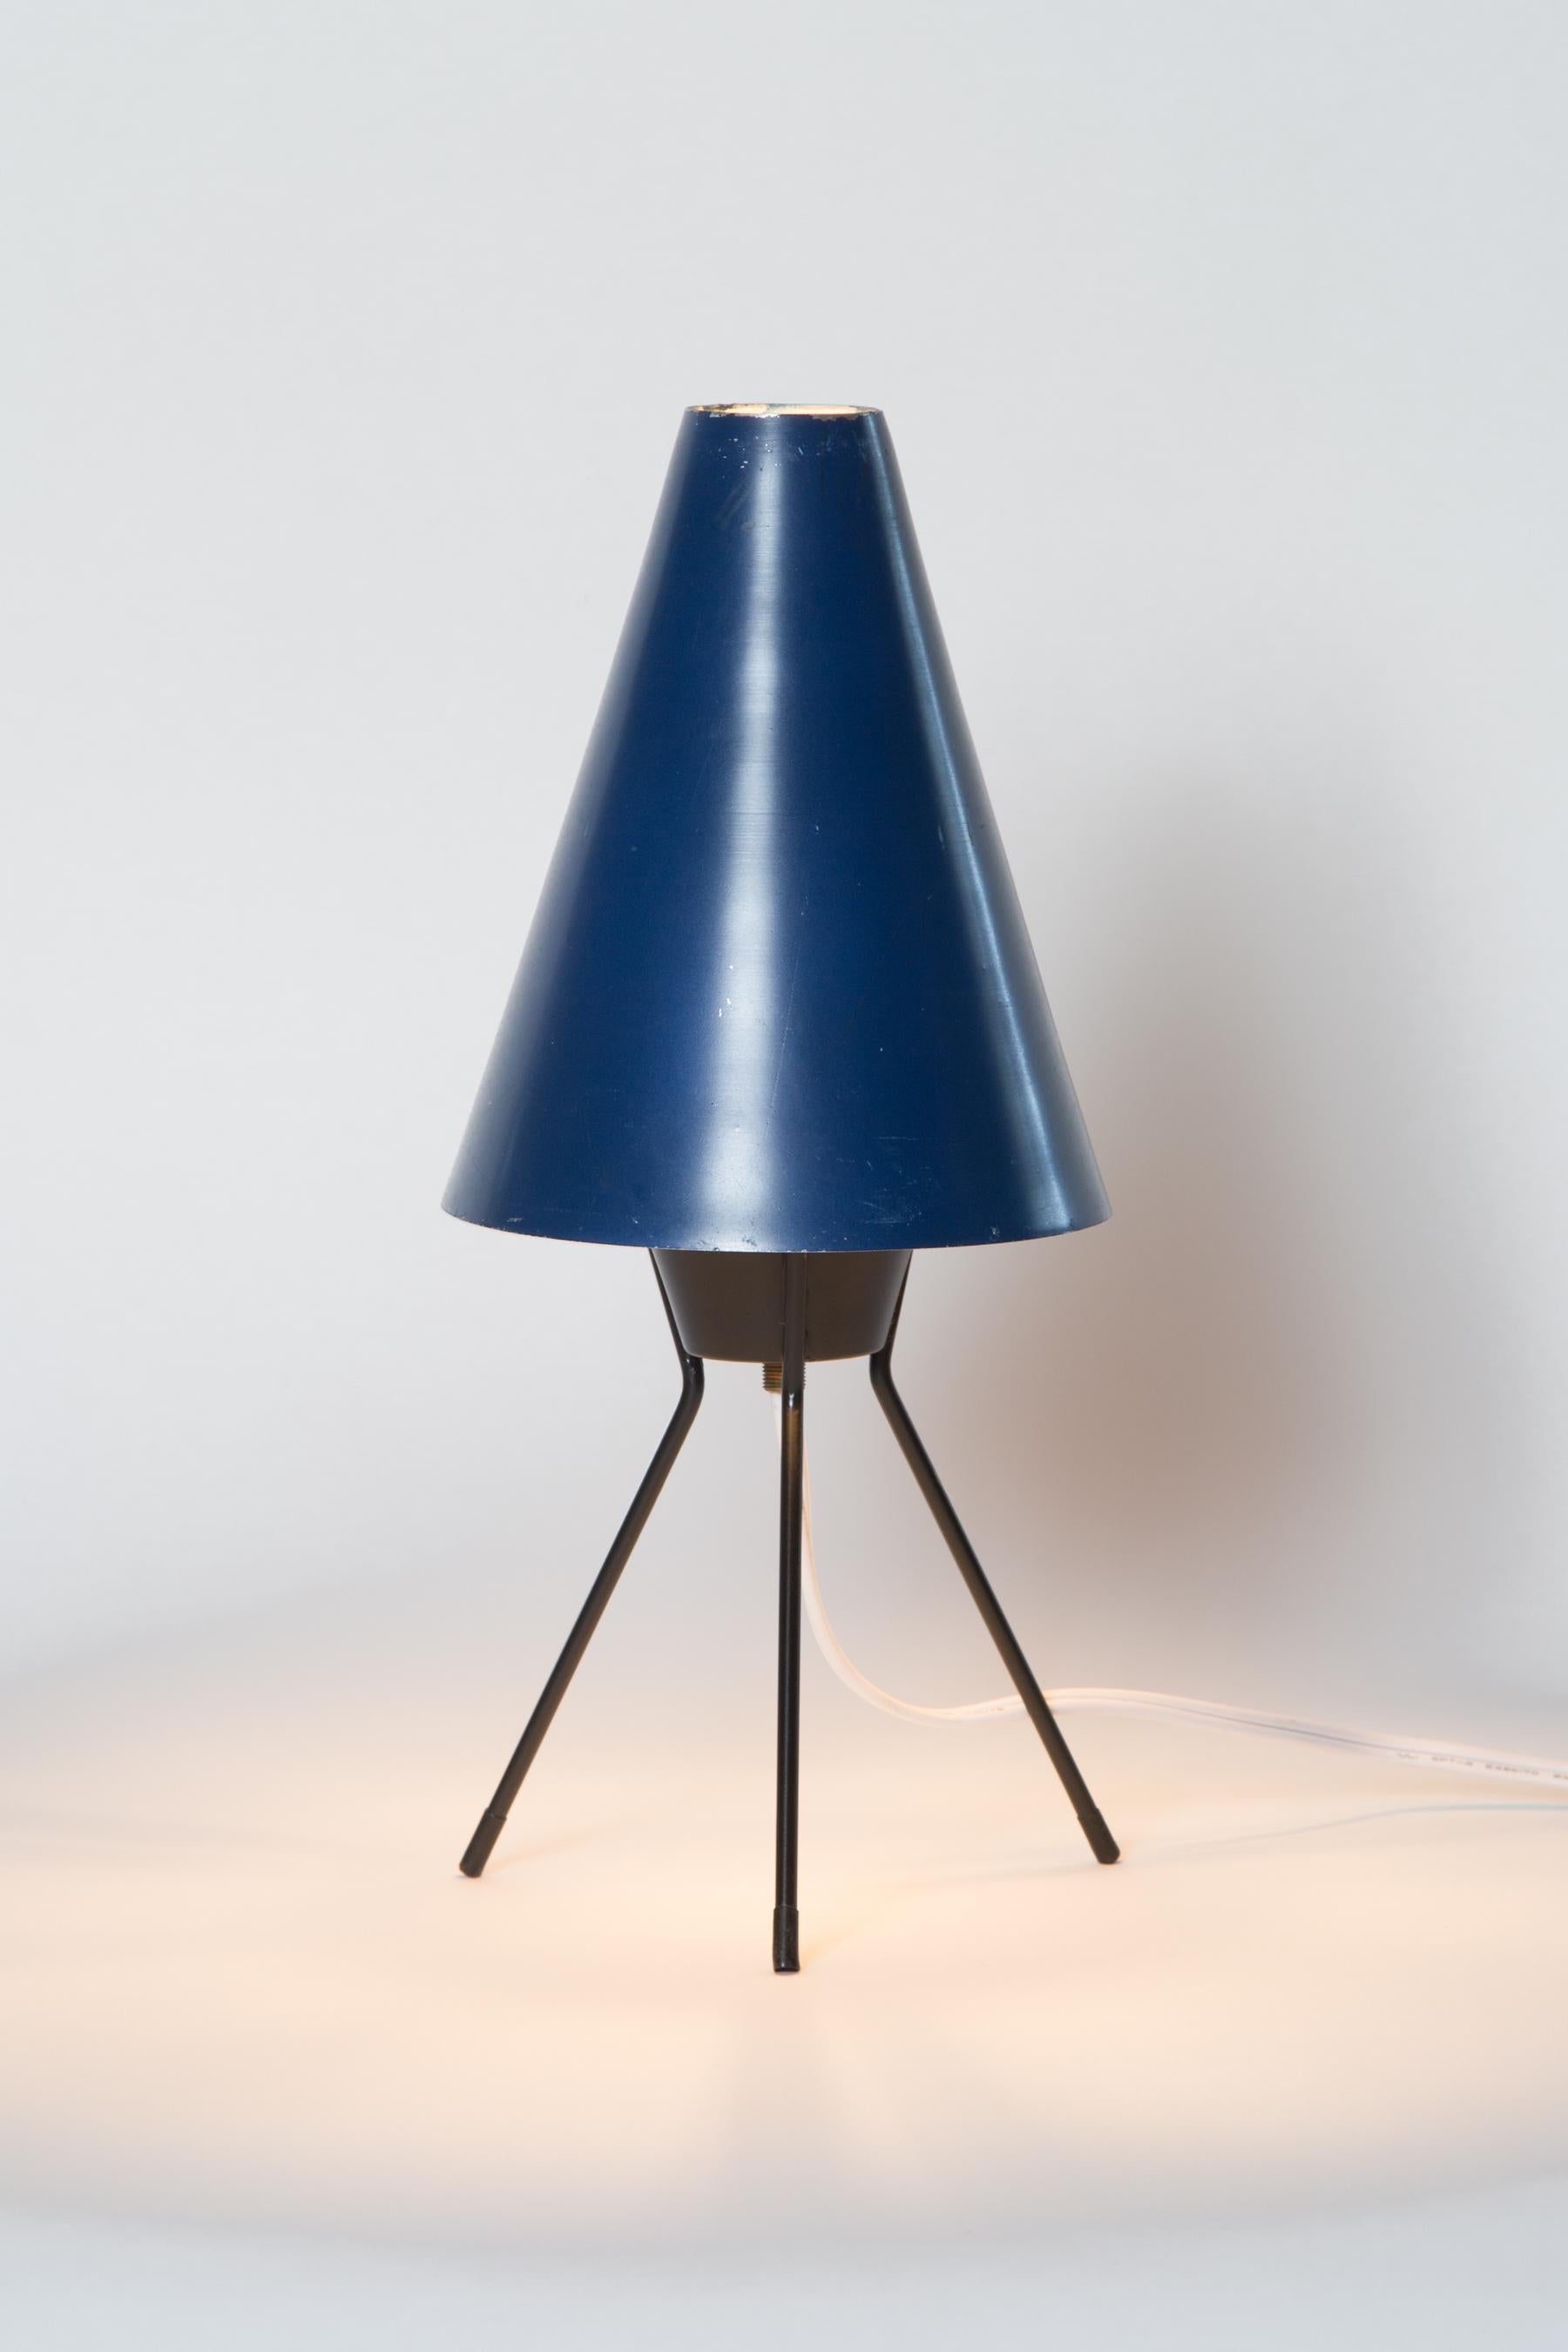 1960s Blue 'Vice Versa' Tripod Table Lamp Attributed to Stilux Milano For Sale 2